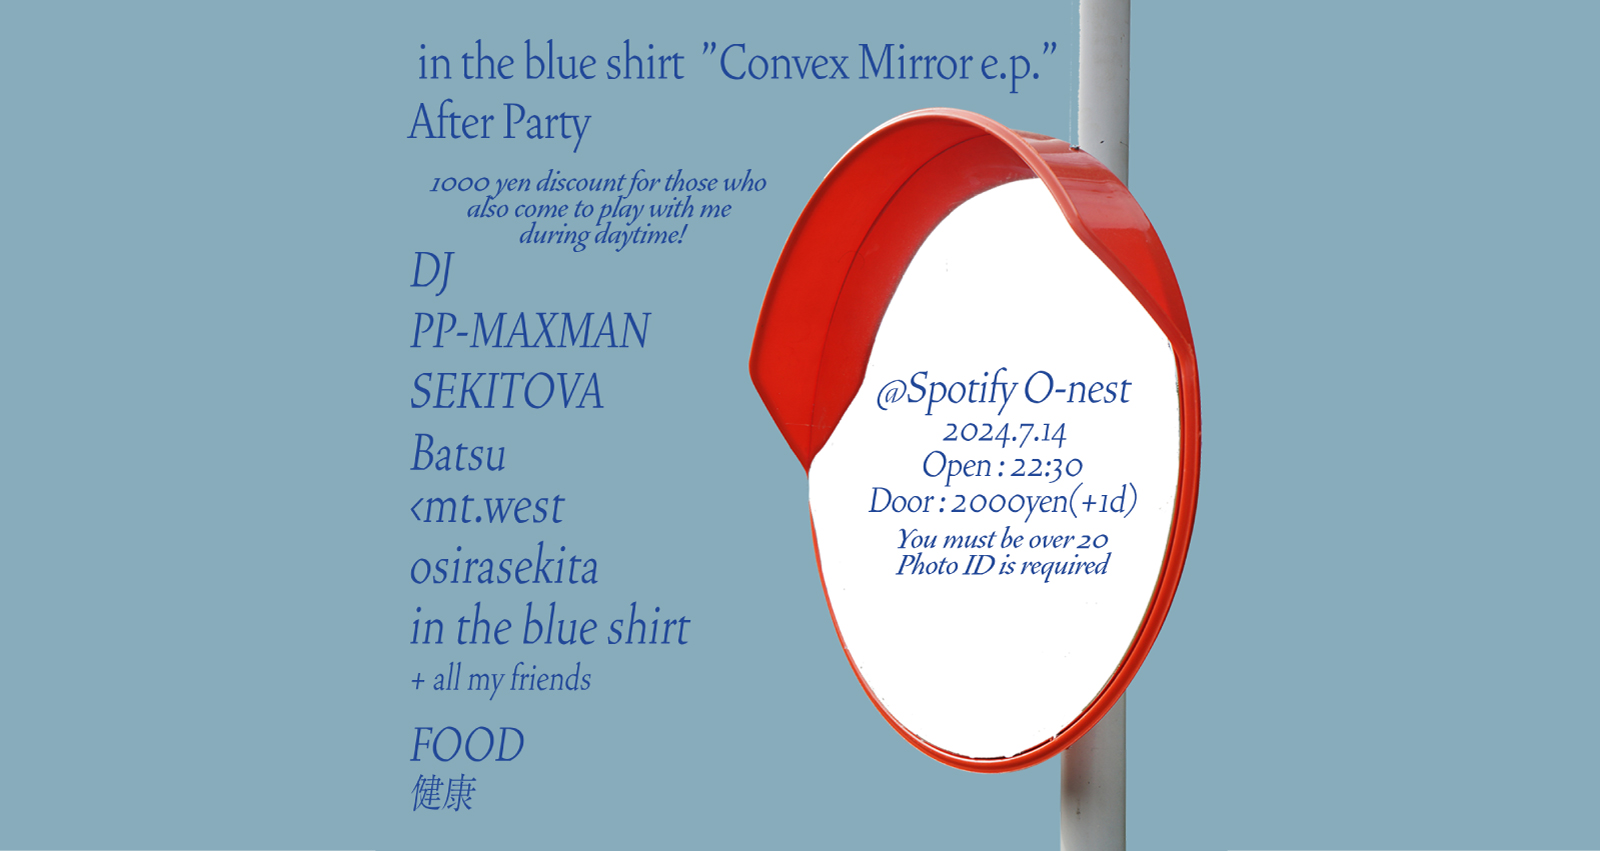 in the blue shirt “Convex Mirror e.p.” After Party